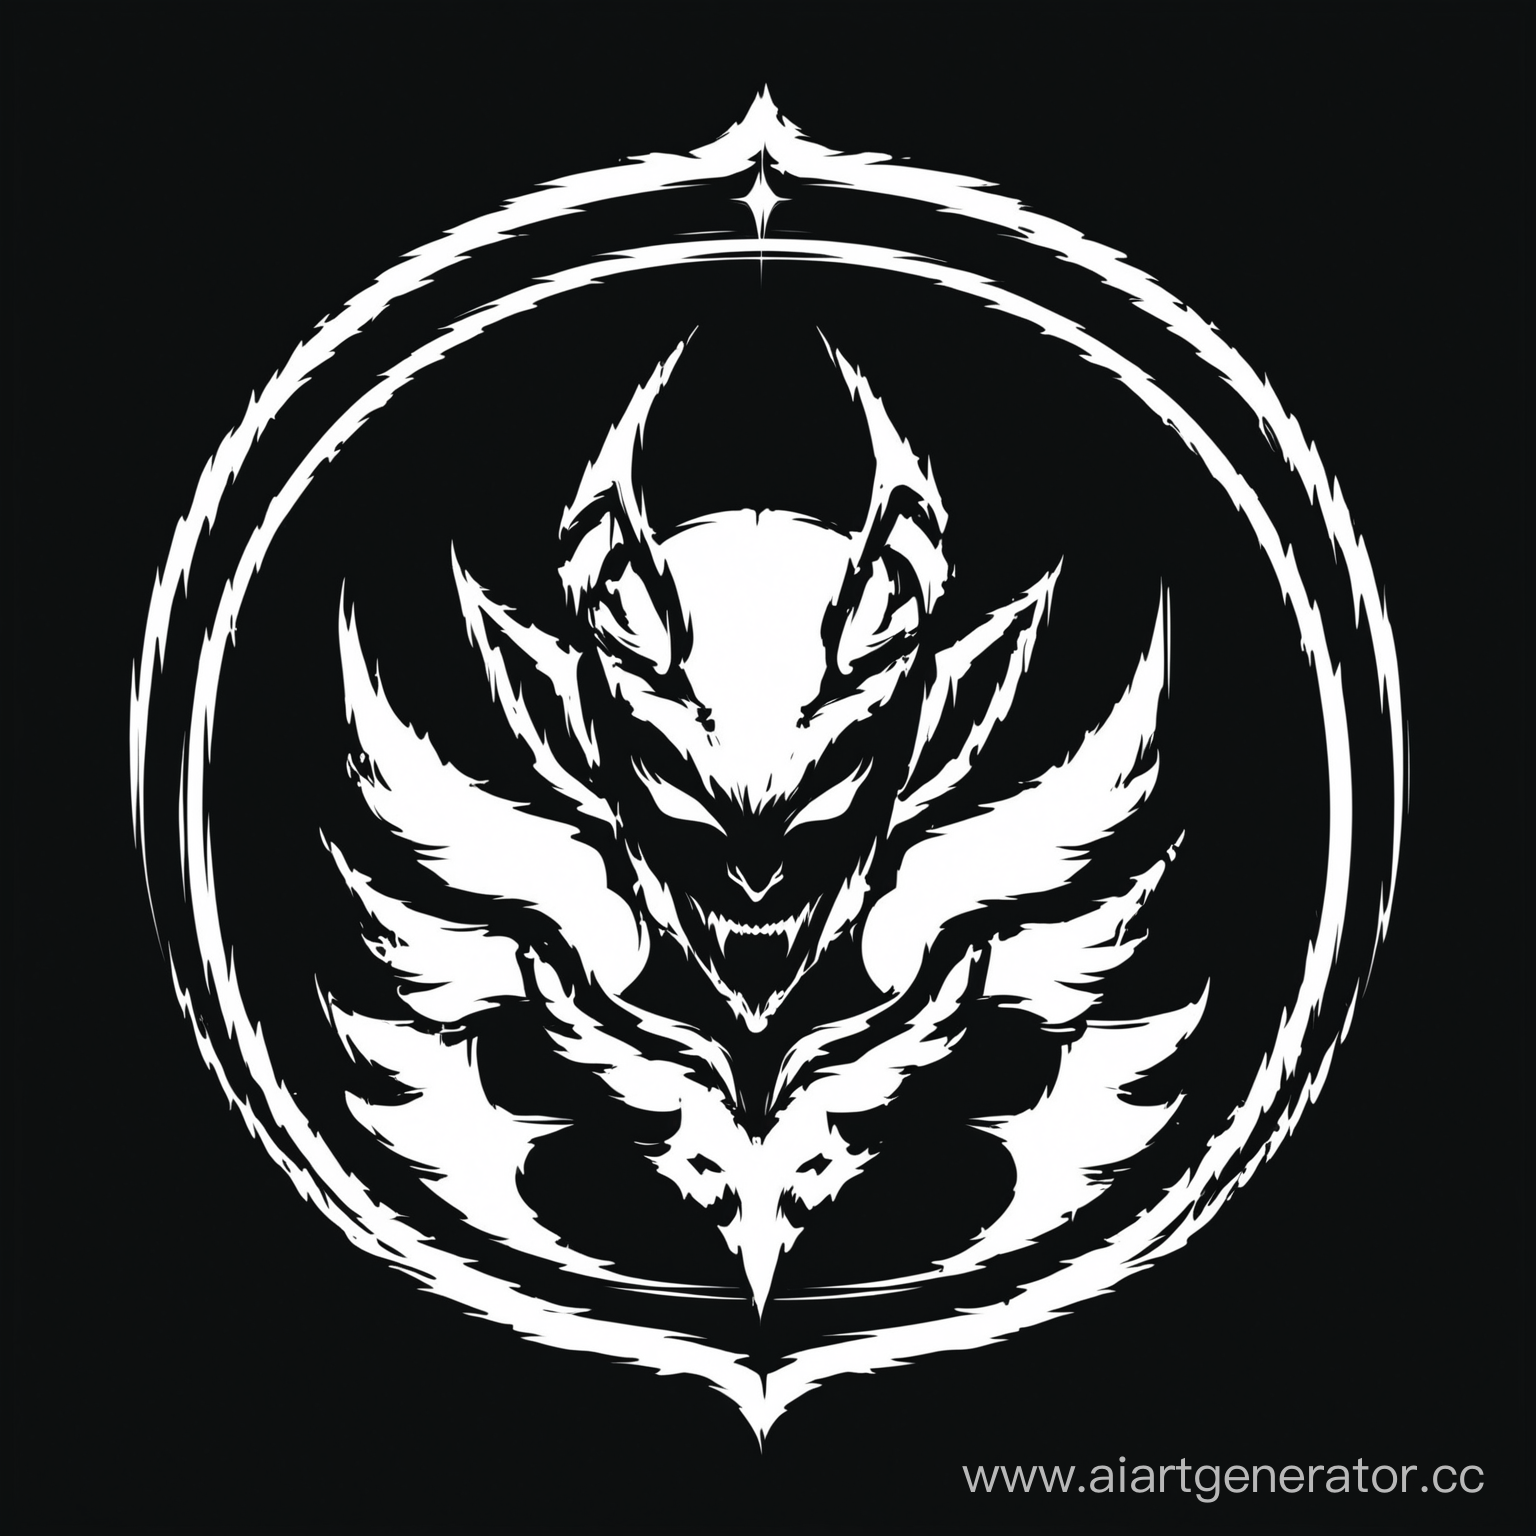 alias of people demons and angels, black and white, avatar for a fighting game, icon on a black background,minimalist